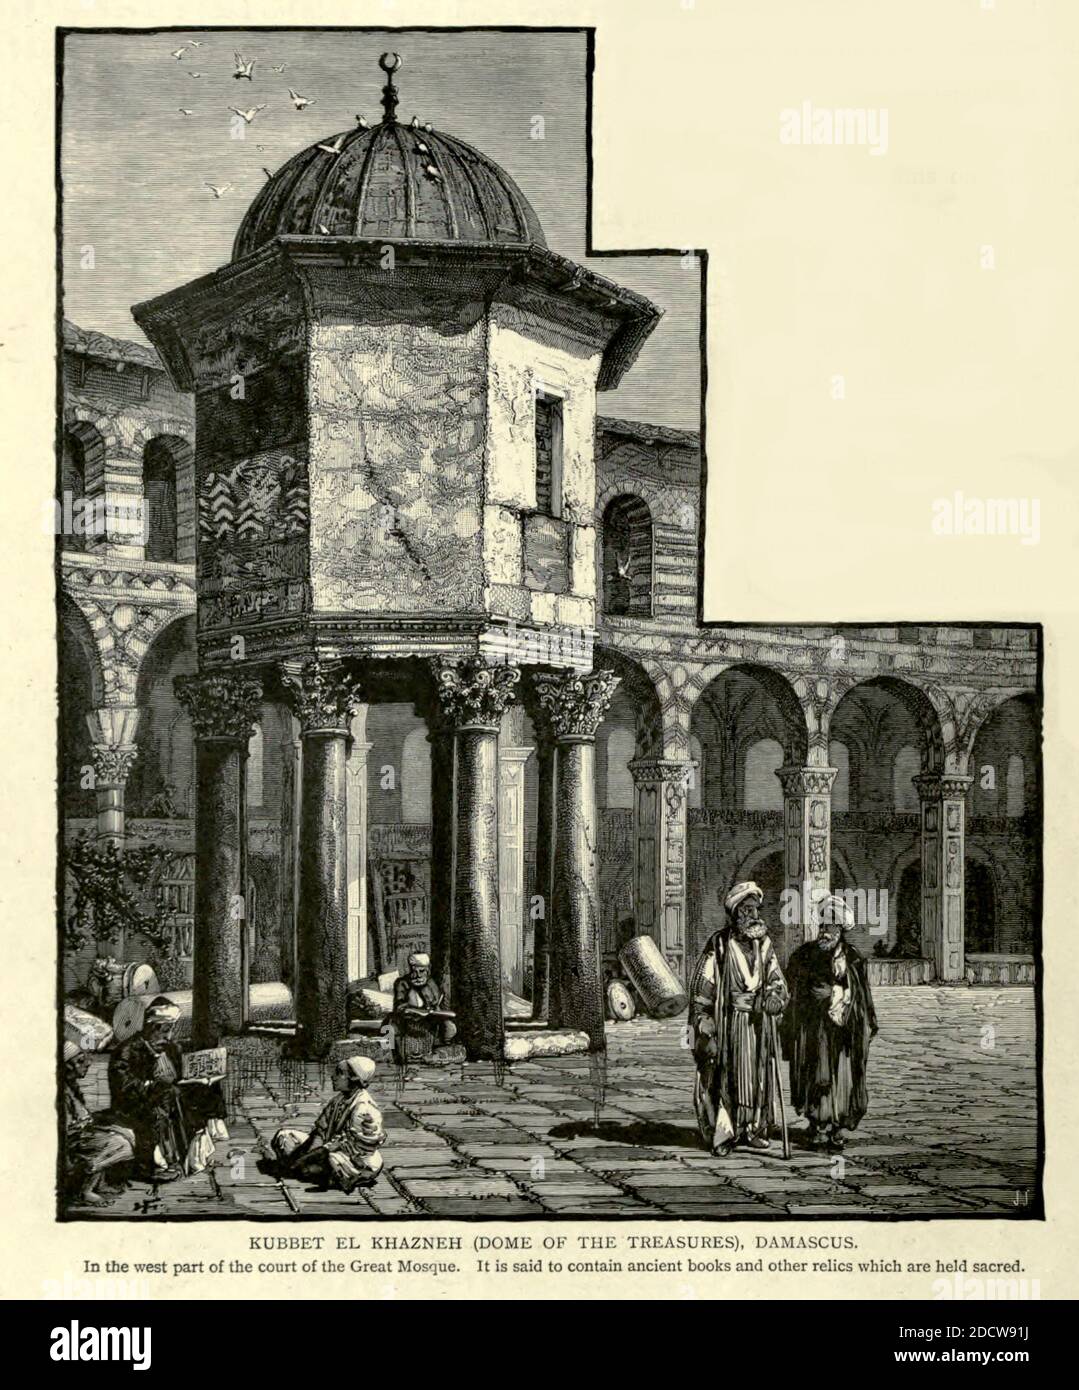 Kubbet el Khazneh (Dome of the Treasures), Damascus, Syria Engraving on Wood from Picturesque Palestine, Sinai and Egypt by Wilson, Charles William, Sir, 1836-1905; Lane-Poole, Stanley, 1854-1931 Volume 2. Published in New York by D. Appleton in 1881-1884 Stock Photo